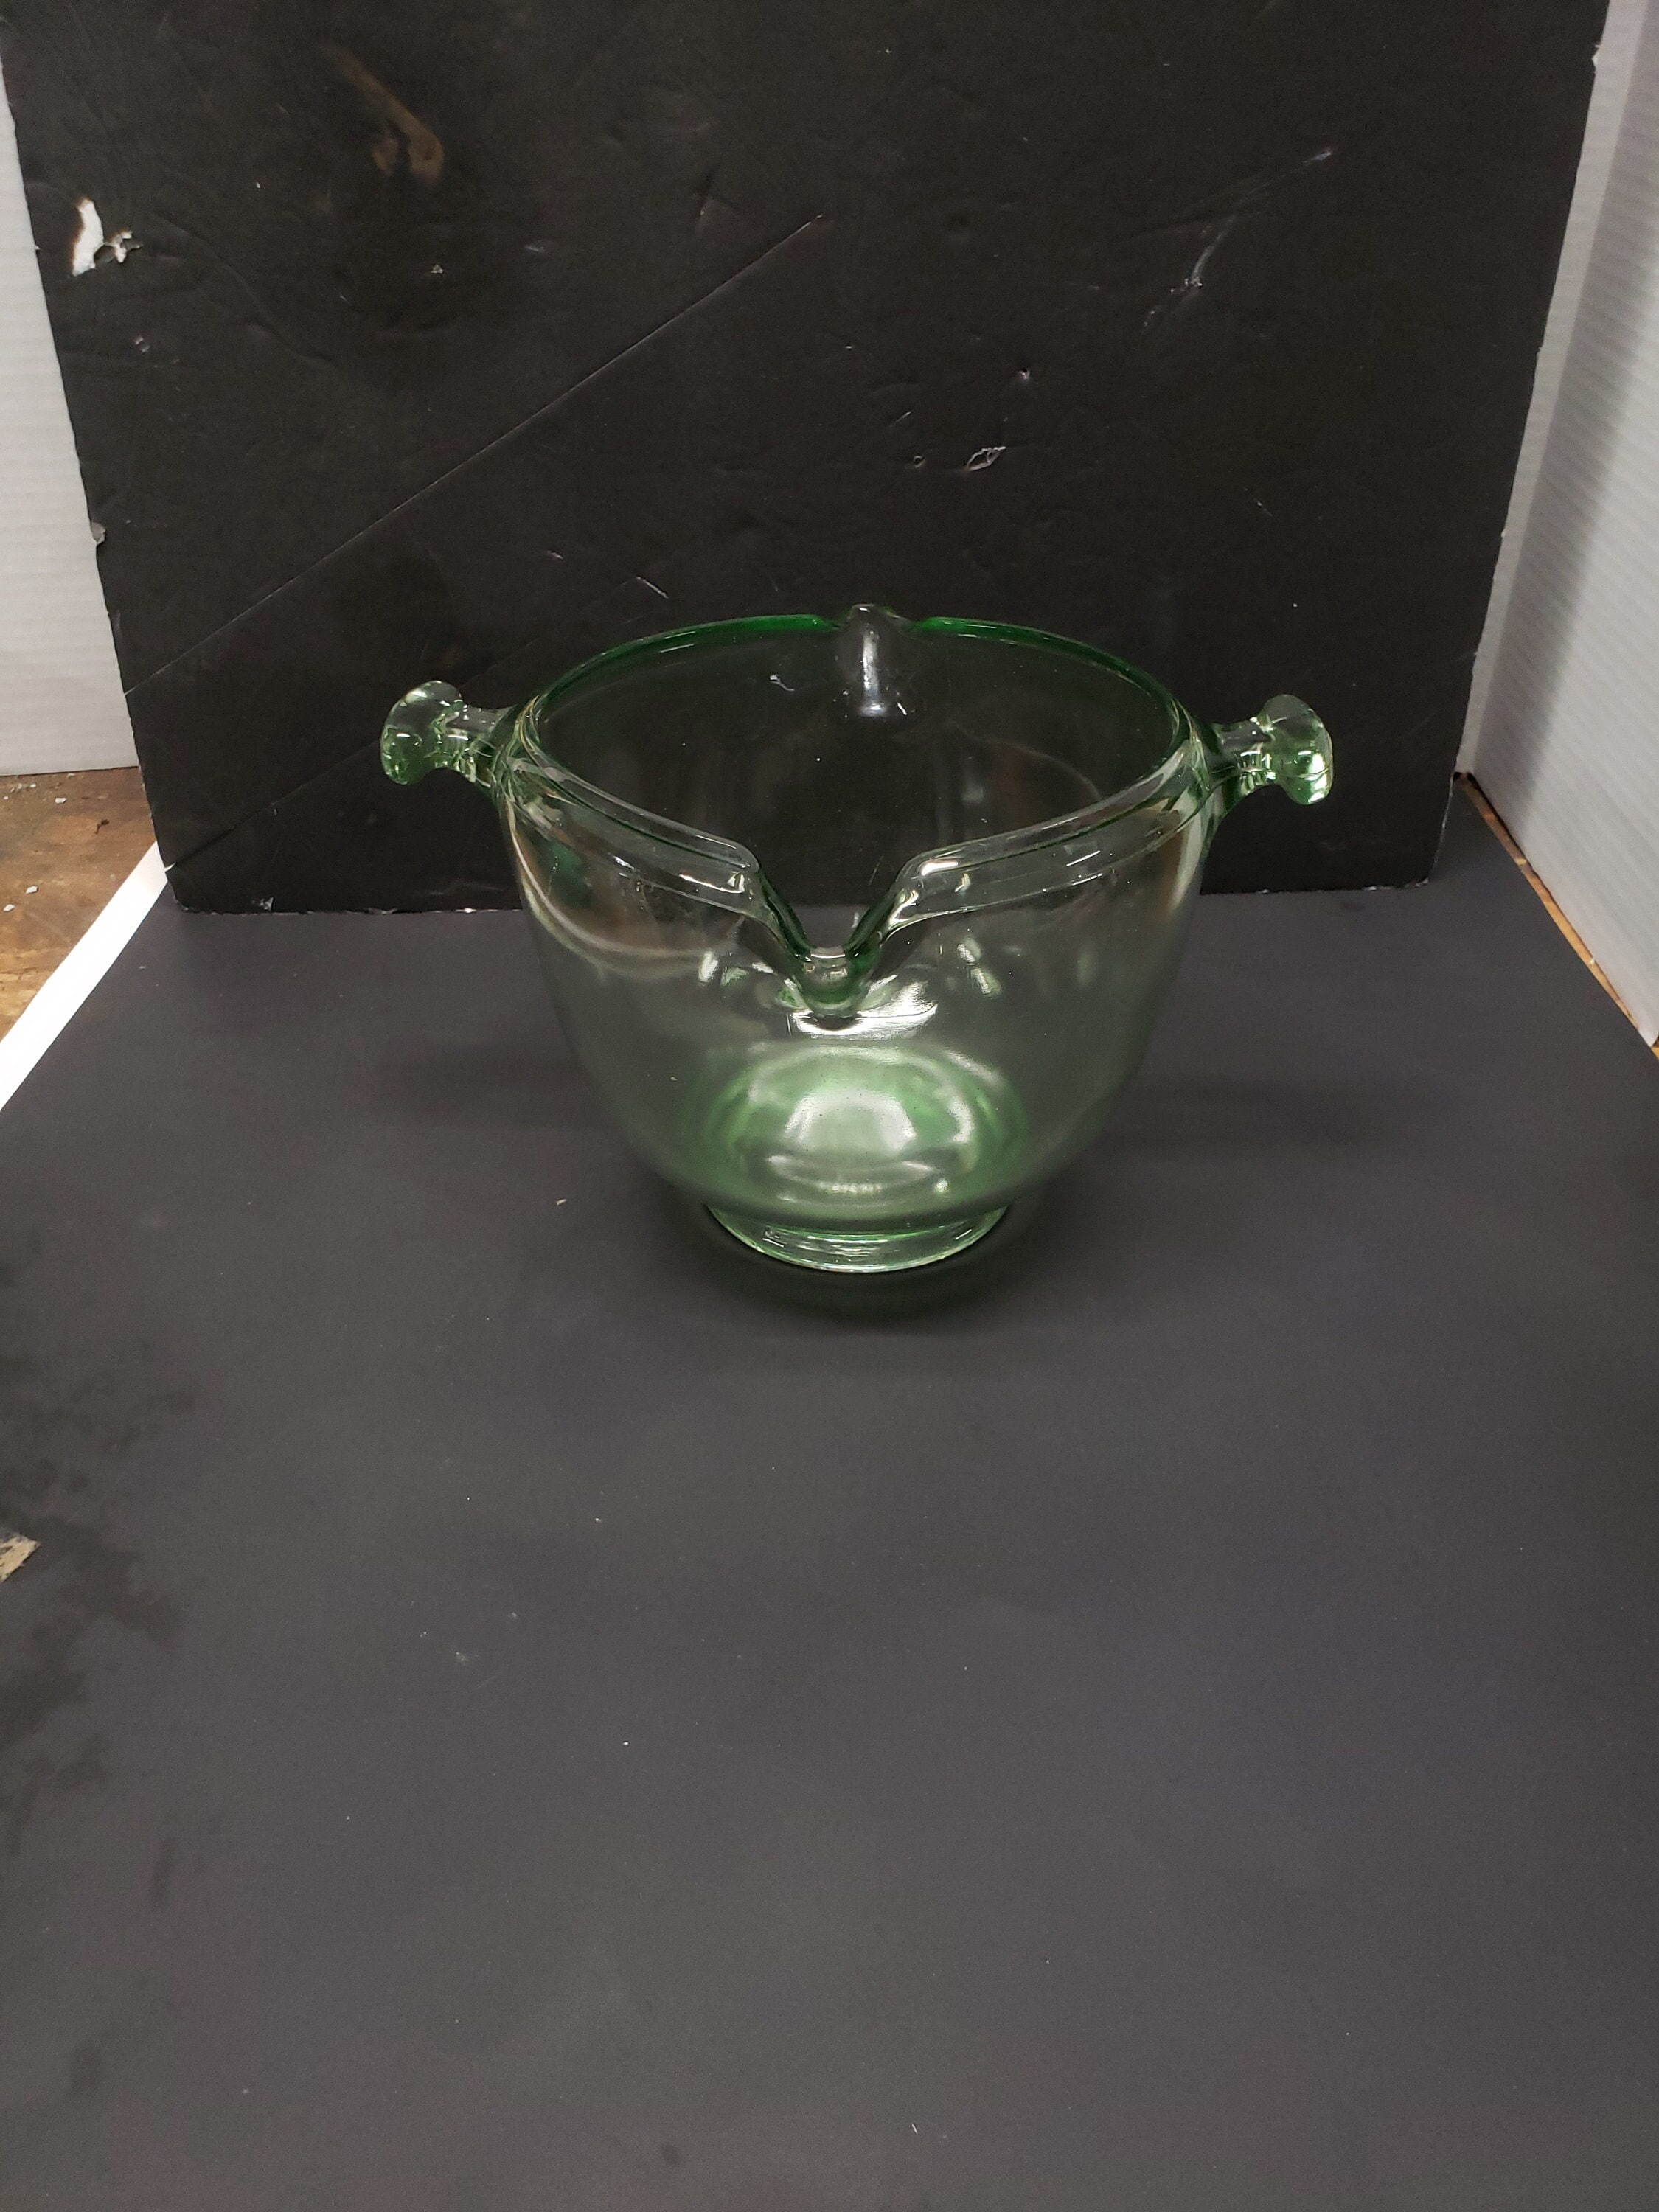 Vintage Emerald Green Glass Mixing Bowl W Pour Spout Mid Century Retro 6  Cup Forest Green Baking Tools Pyrex / Anchor Hocking Type Glass 